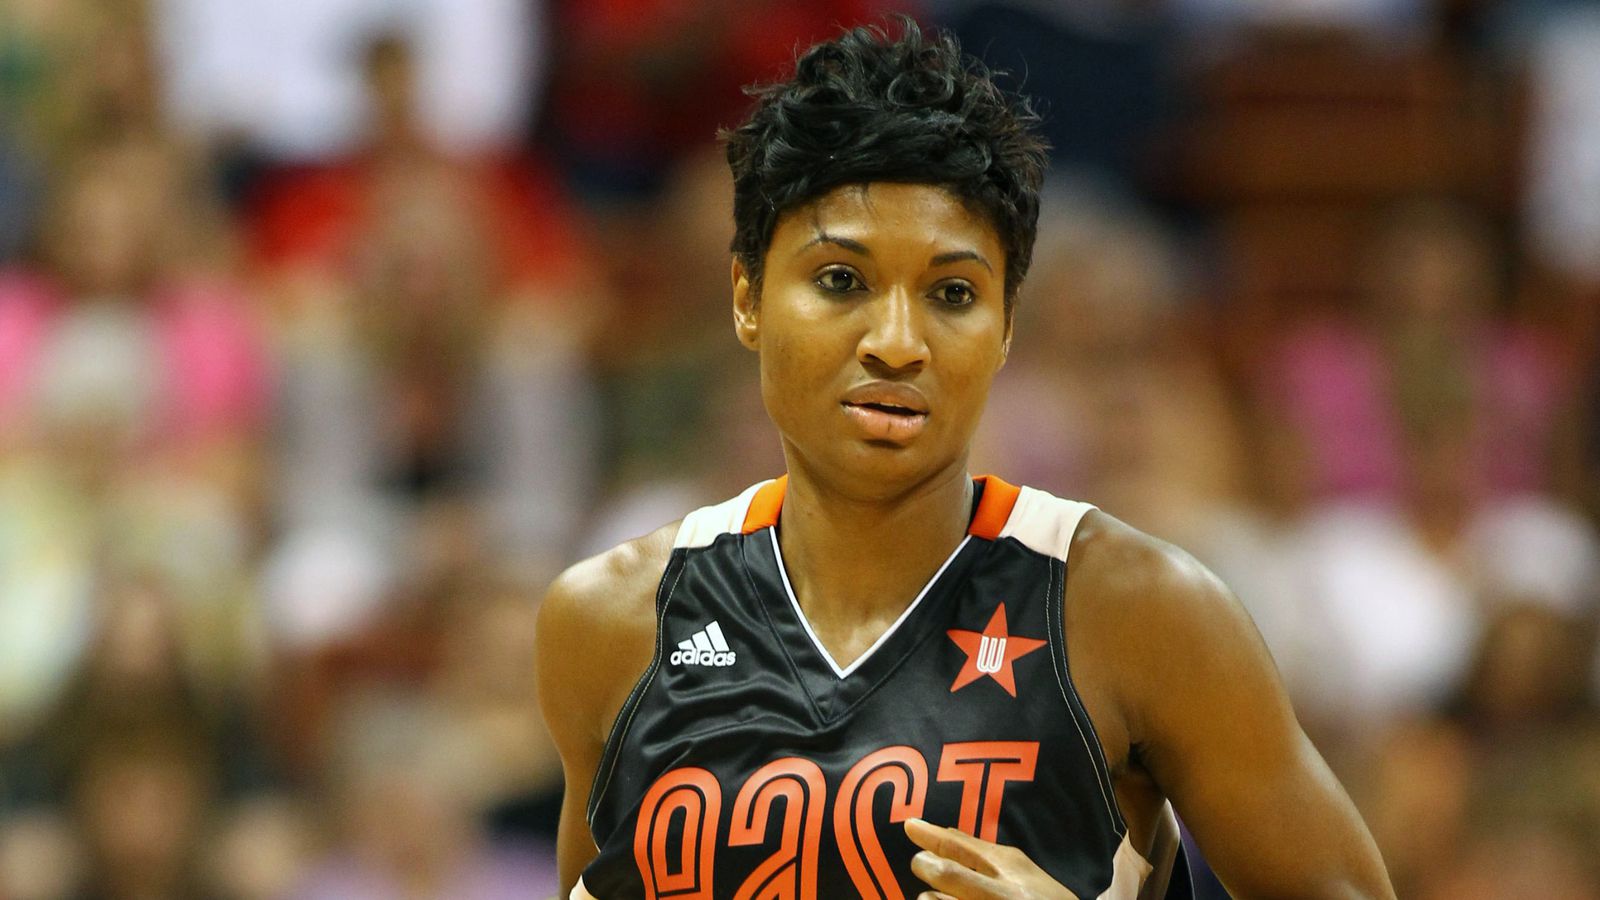 Wnba sexiest player - 🧡 Pin on lovely wnba players.